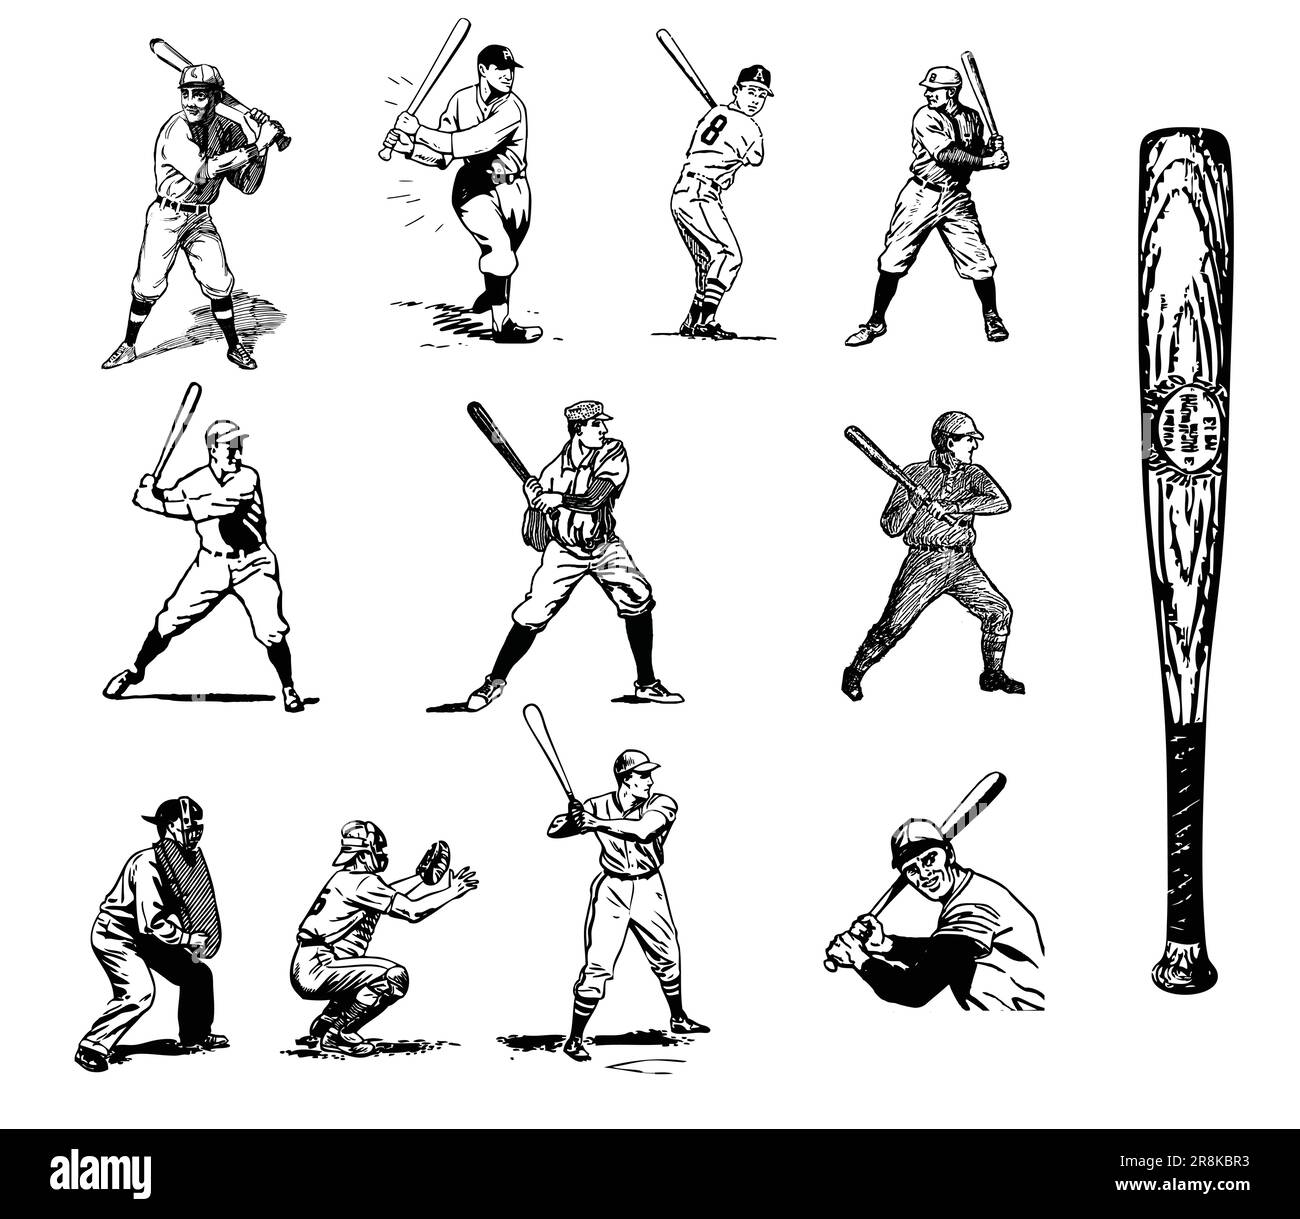 baseball players vintage illustration set ink etching collection vector on white background Stock Vector